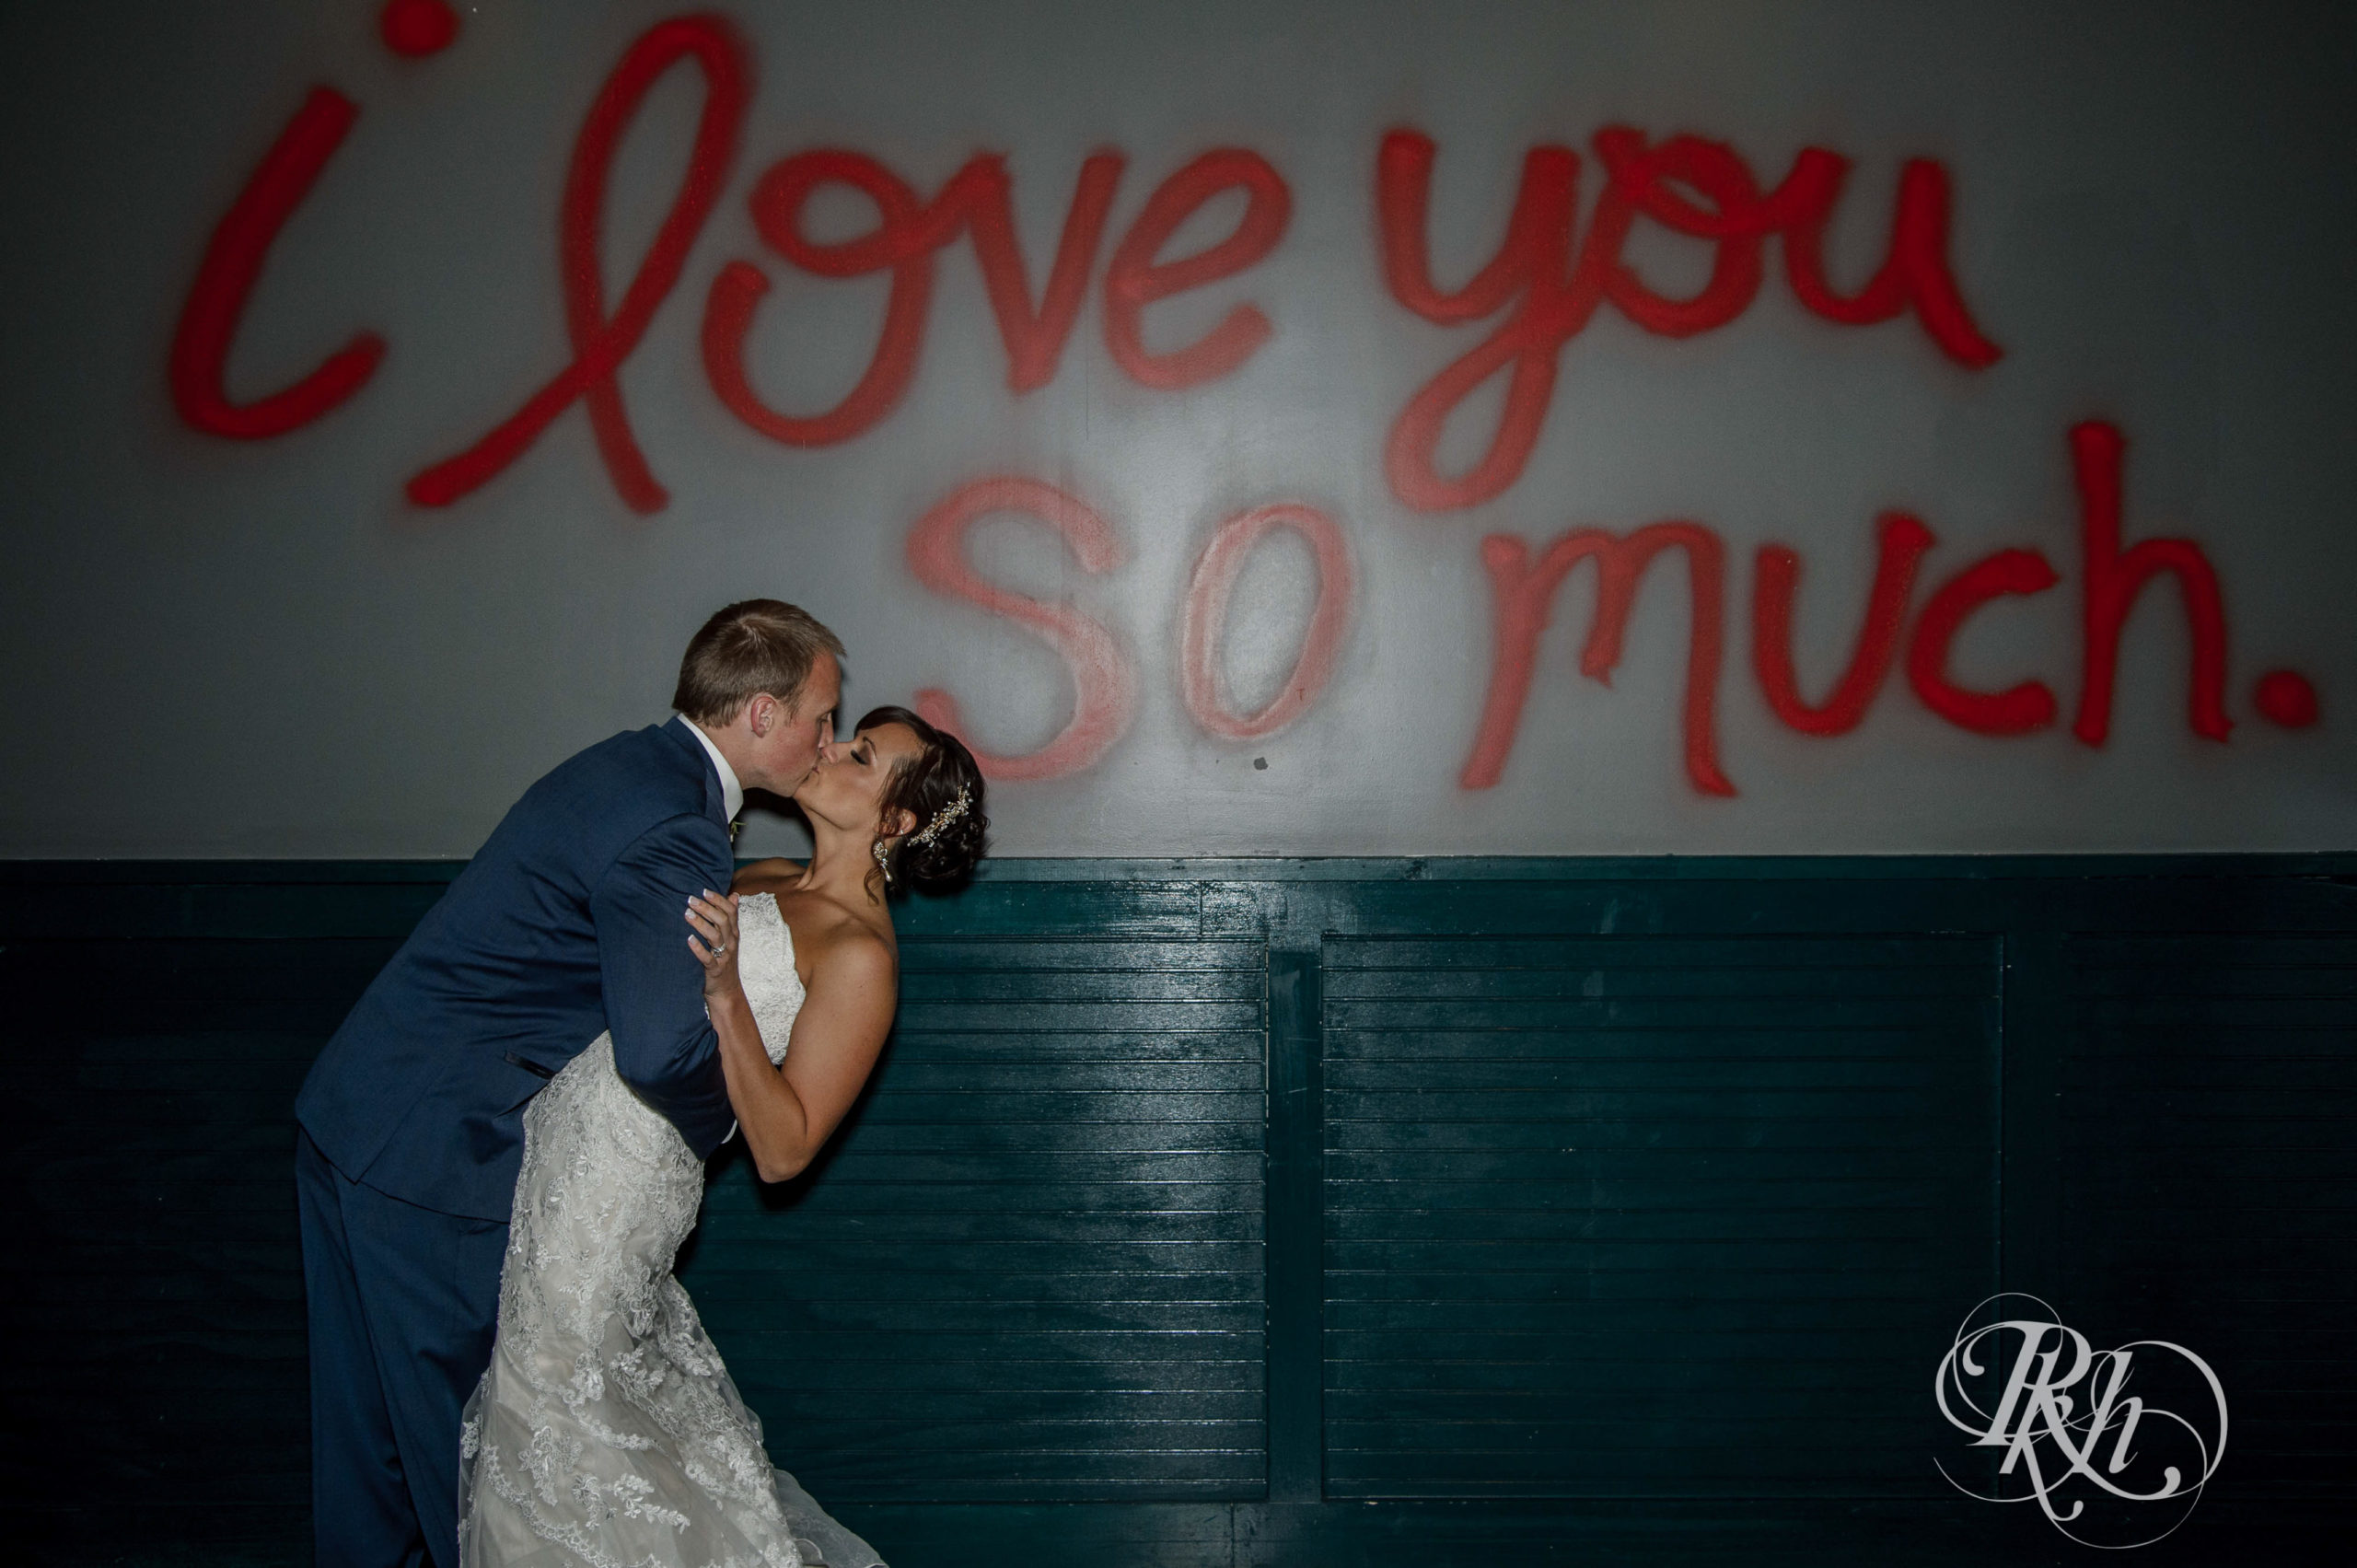 Bride and groom kiss under I LOVE YOU SO MUCH sign at Punch Bowl Social on wedding day in Minneapolis, Minnesota.